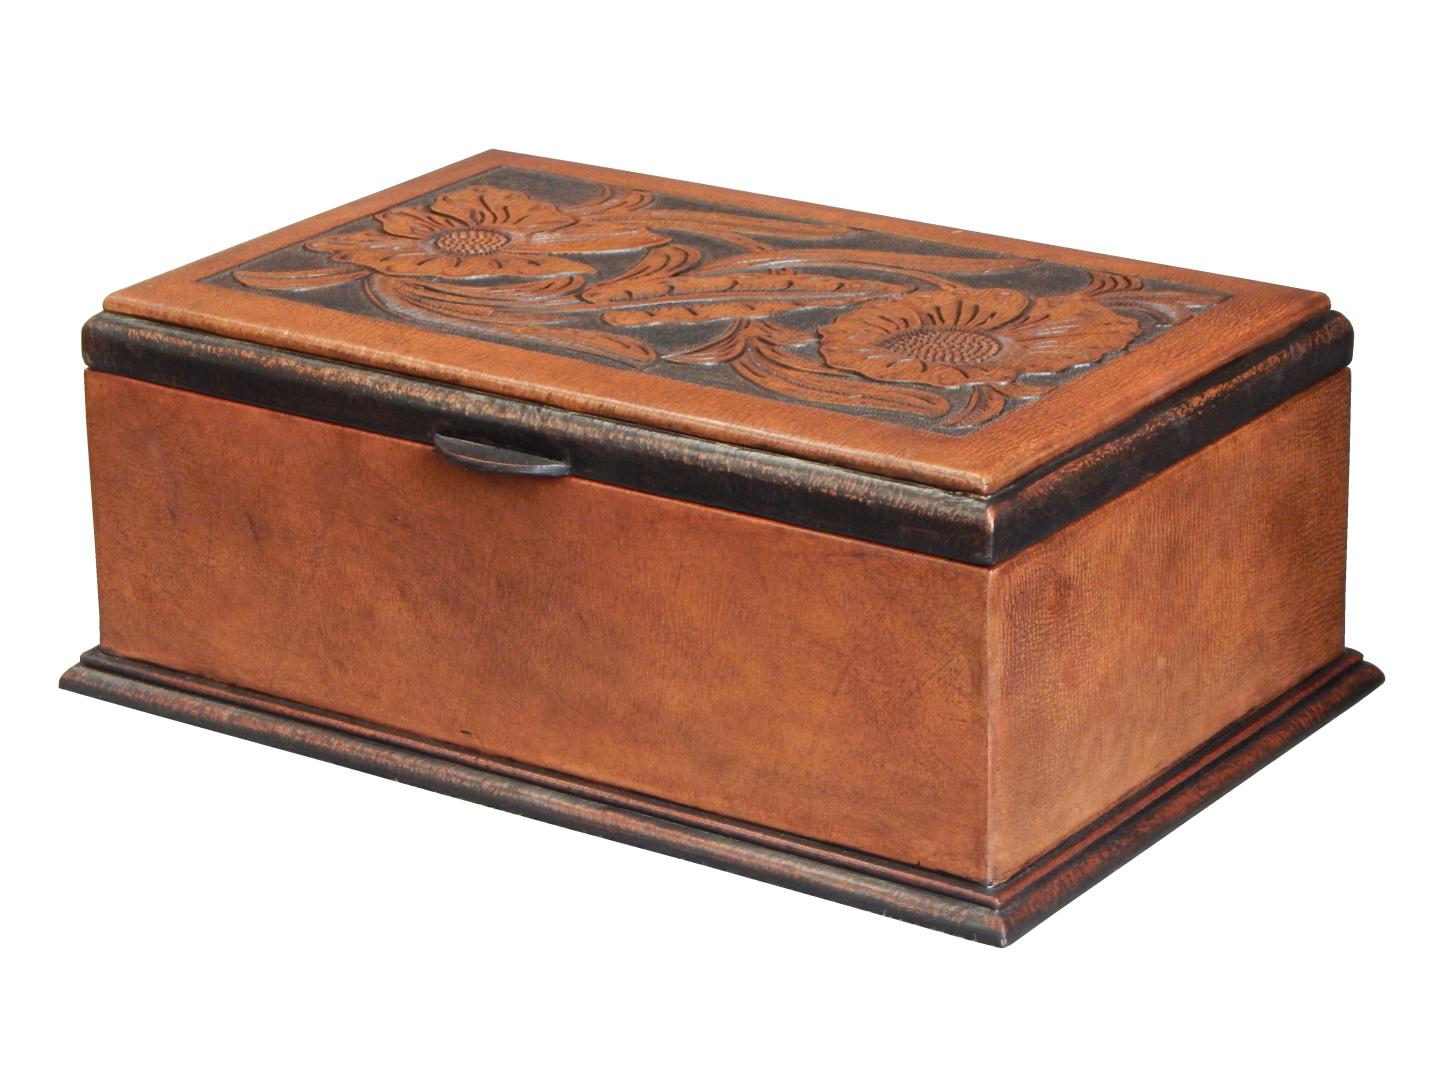 leather box with a floral/Western design/tooling on the top